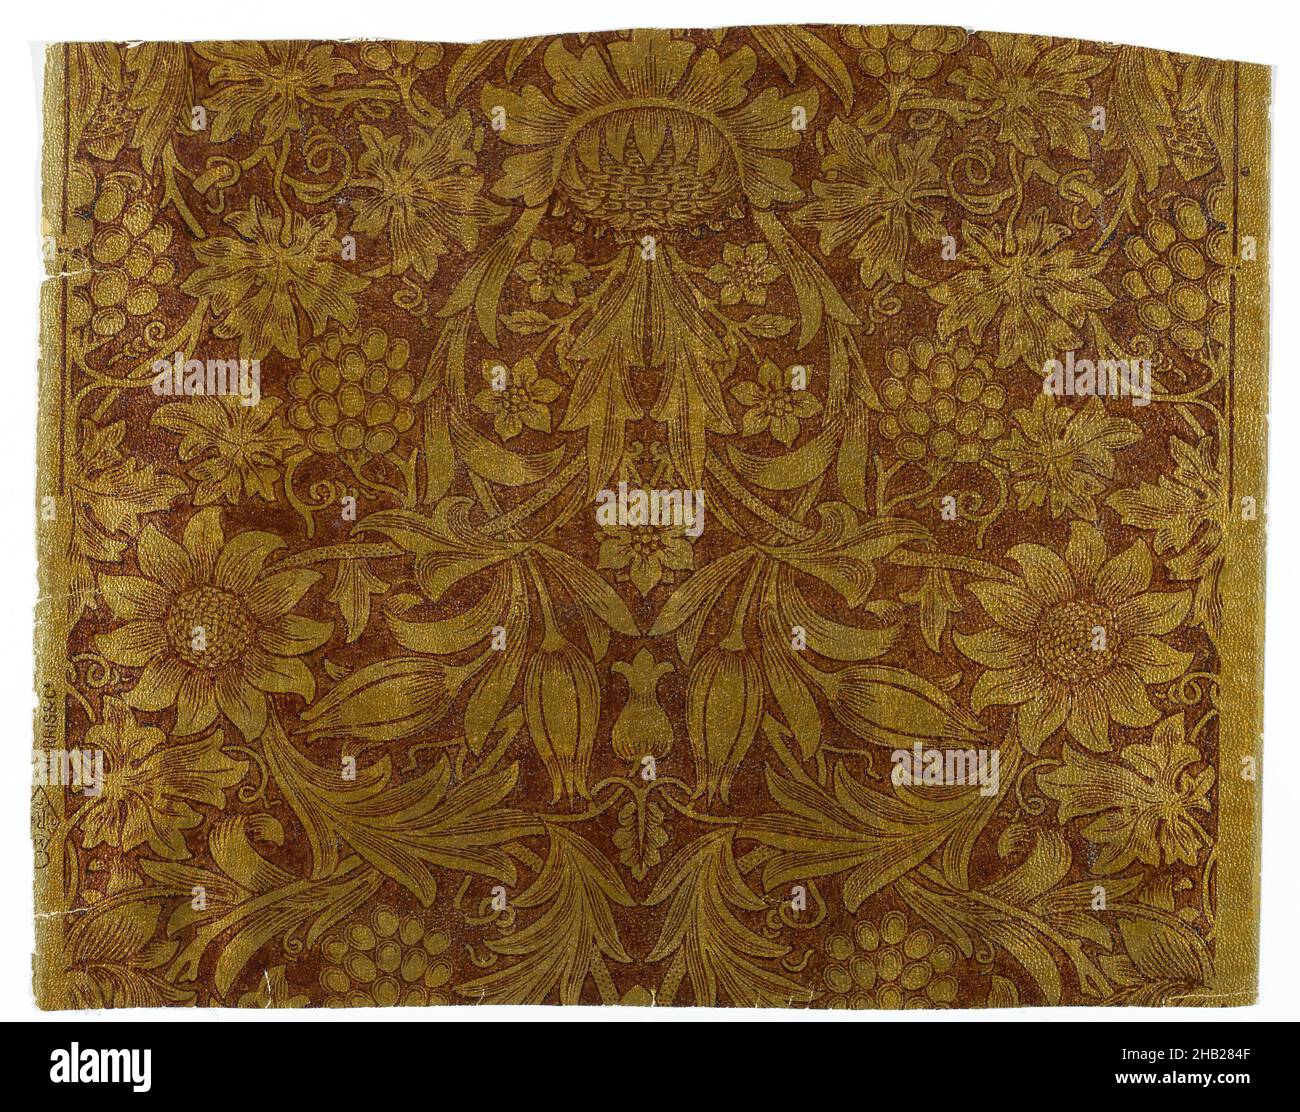 Wallpaper, Sunflower pattern, Paper, designed ca. 1879, printed later, 22 1/2 x 17 3/4 in., 57.2 x 45.1 cm, botanical, décor, fabric design, interior decorating, interior design, textile design, wall treatment, wall-decoration Stock Photo